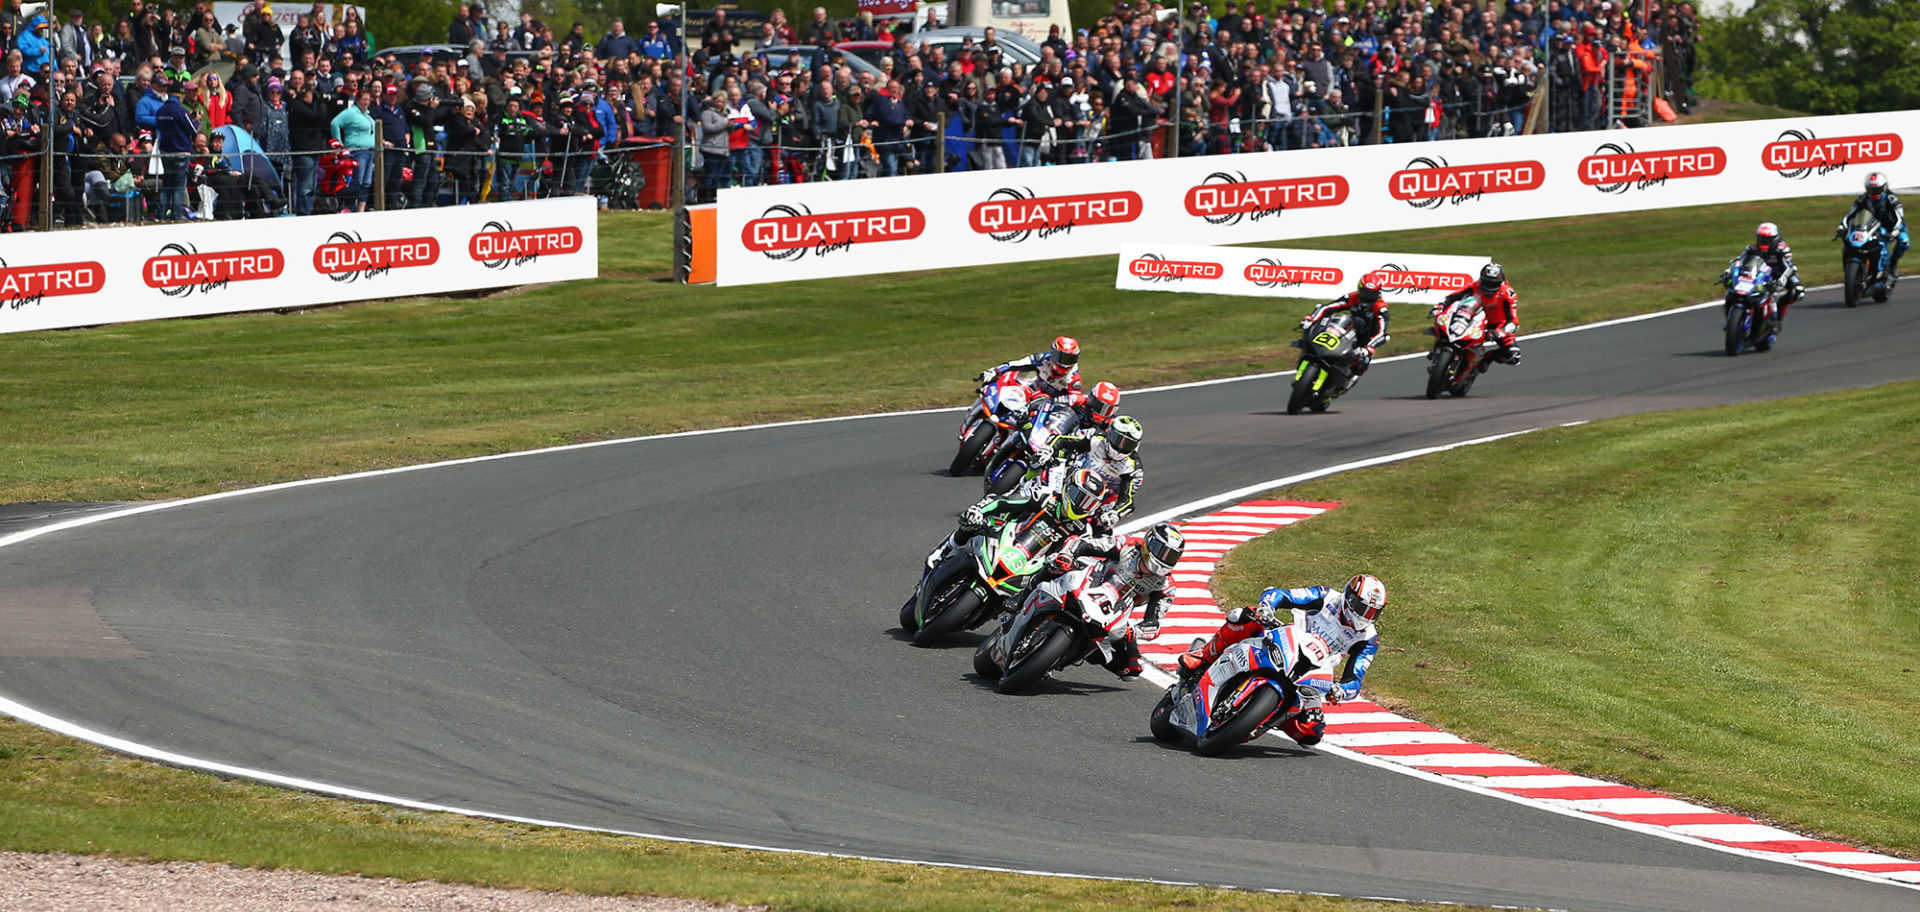 Quattro Group is an official sponsor of the 2020 British Superbike Championship. Photo courtesy of MSVR.